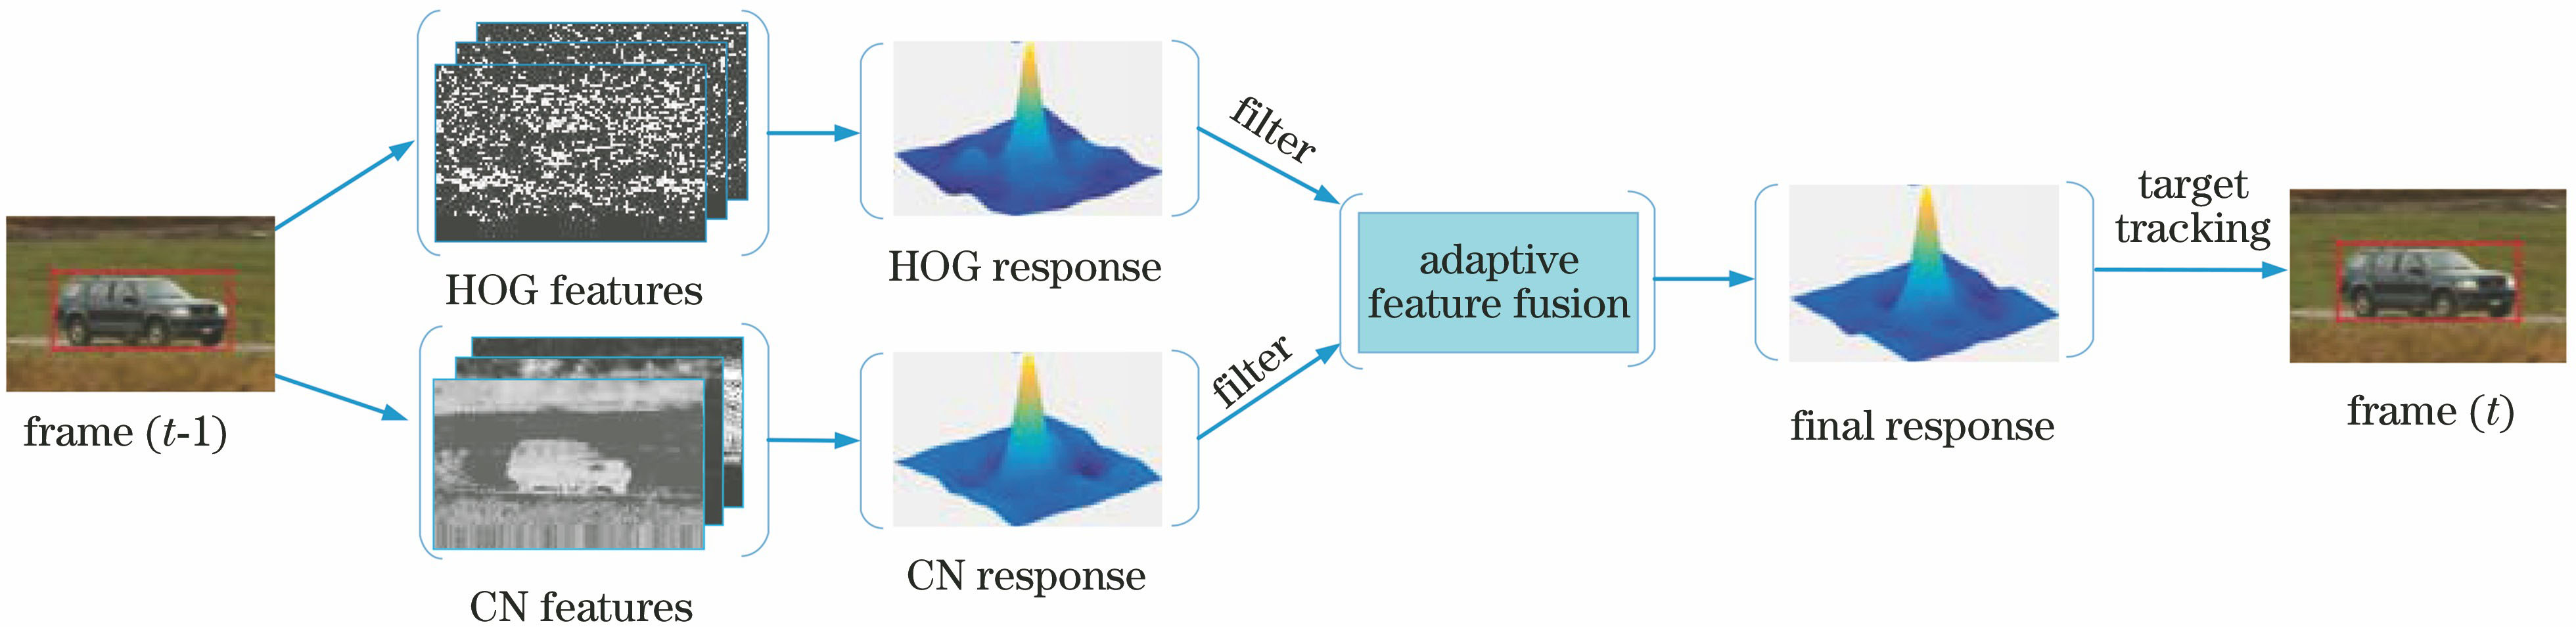 Schematic of adaptive features fusion process